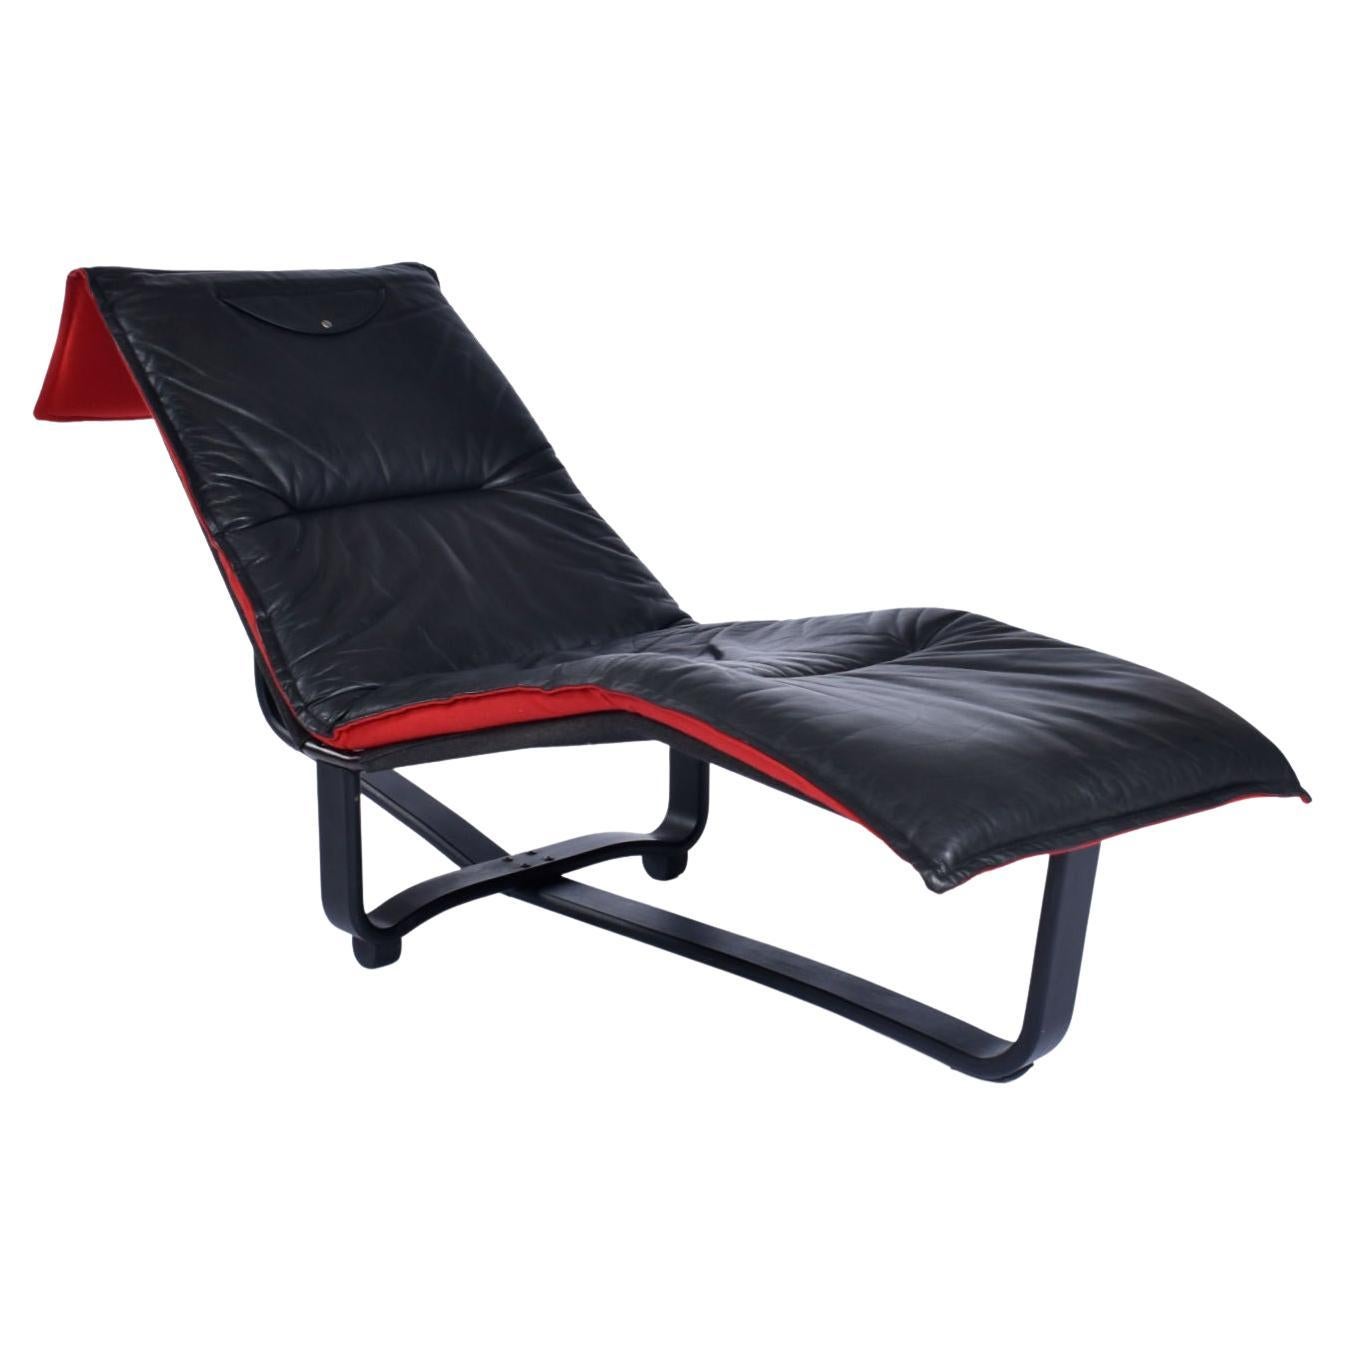 Westnofa Norwegian made leather chaise lounge with reversible cushion. This chaise is exemplary of Scandinavian design genius. It achieves so much, by such simple means. The original cushion is black leather on one side, and red wool on the other